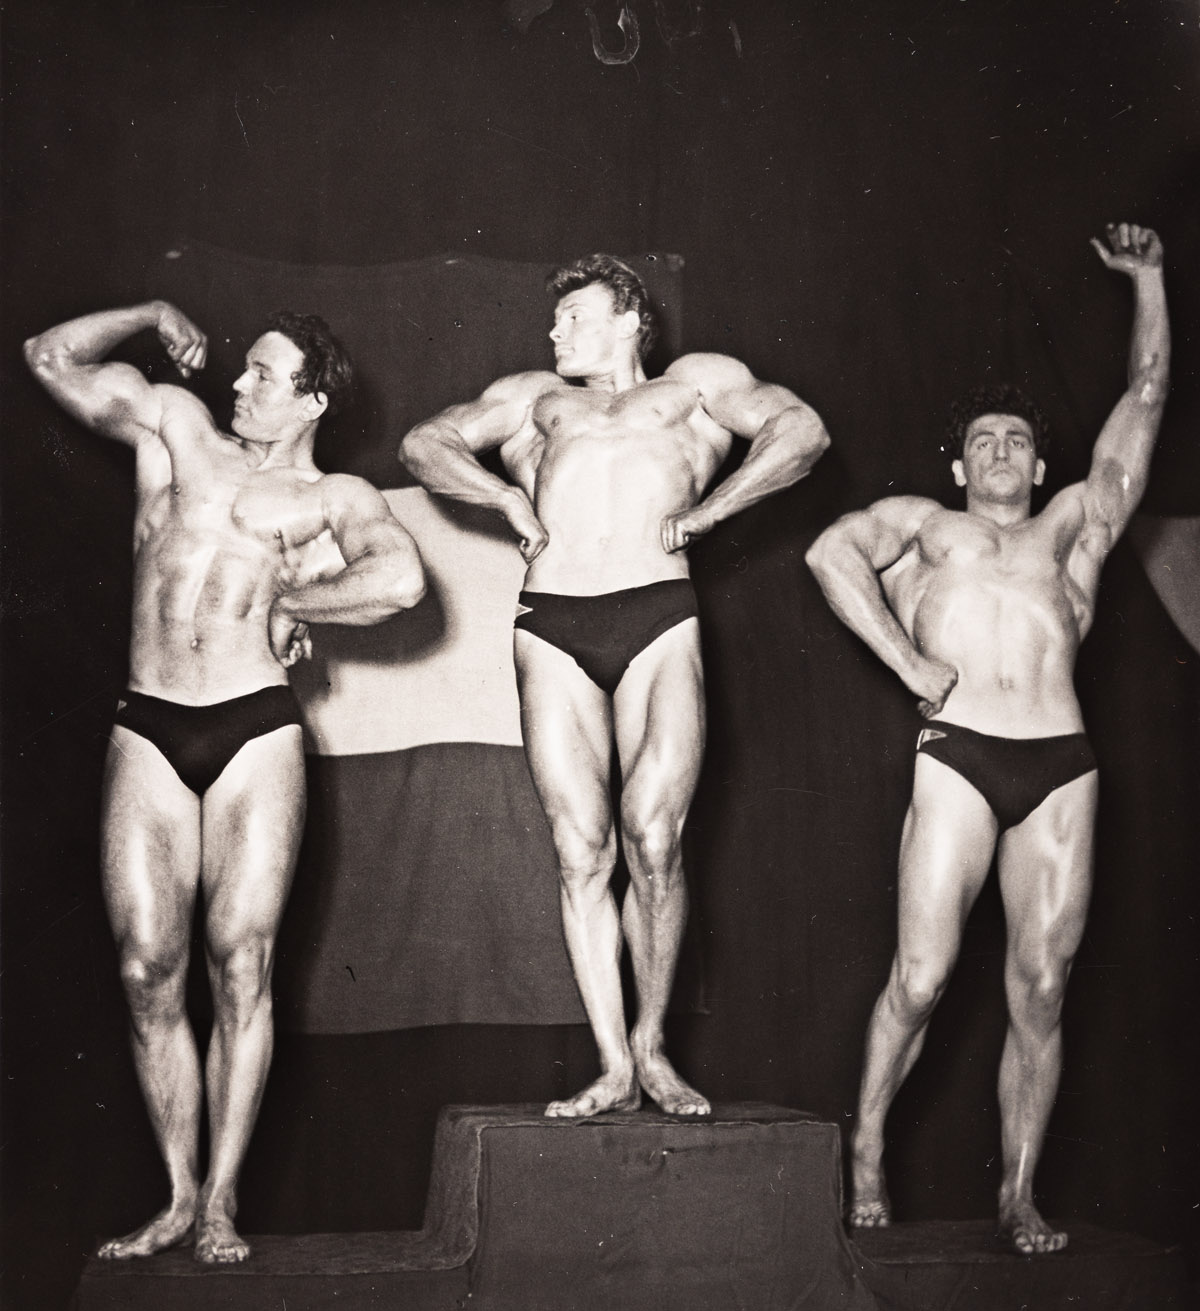 (BODYBUILDING) A bound volume with 105 photographs from Studio Arax centered on bodybuilders.